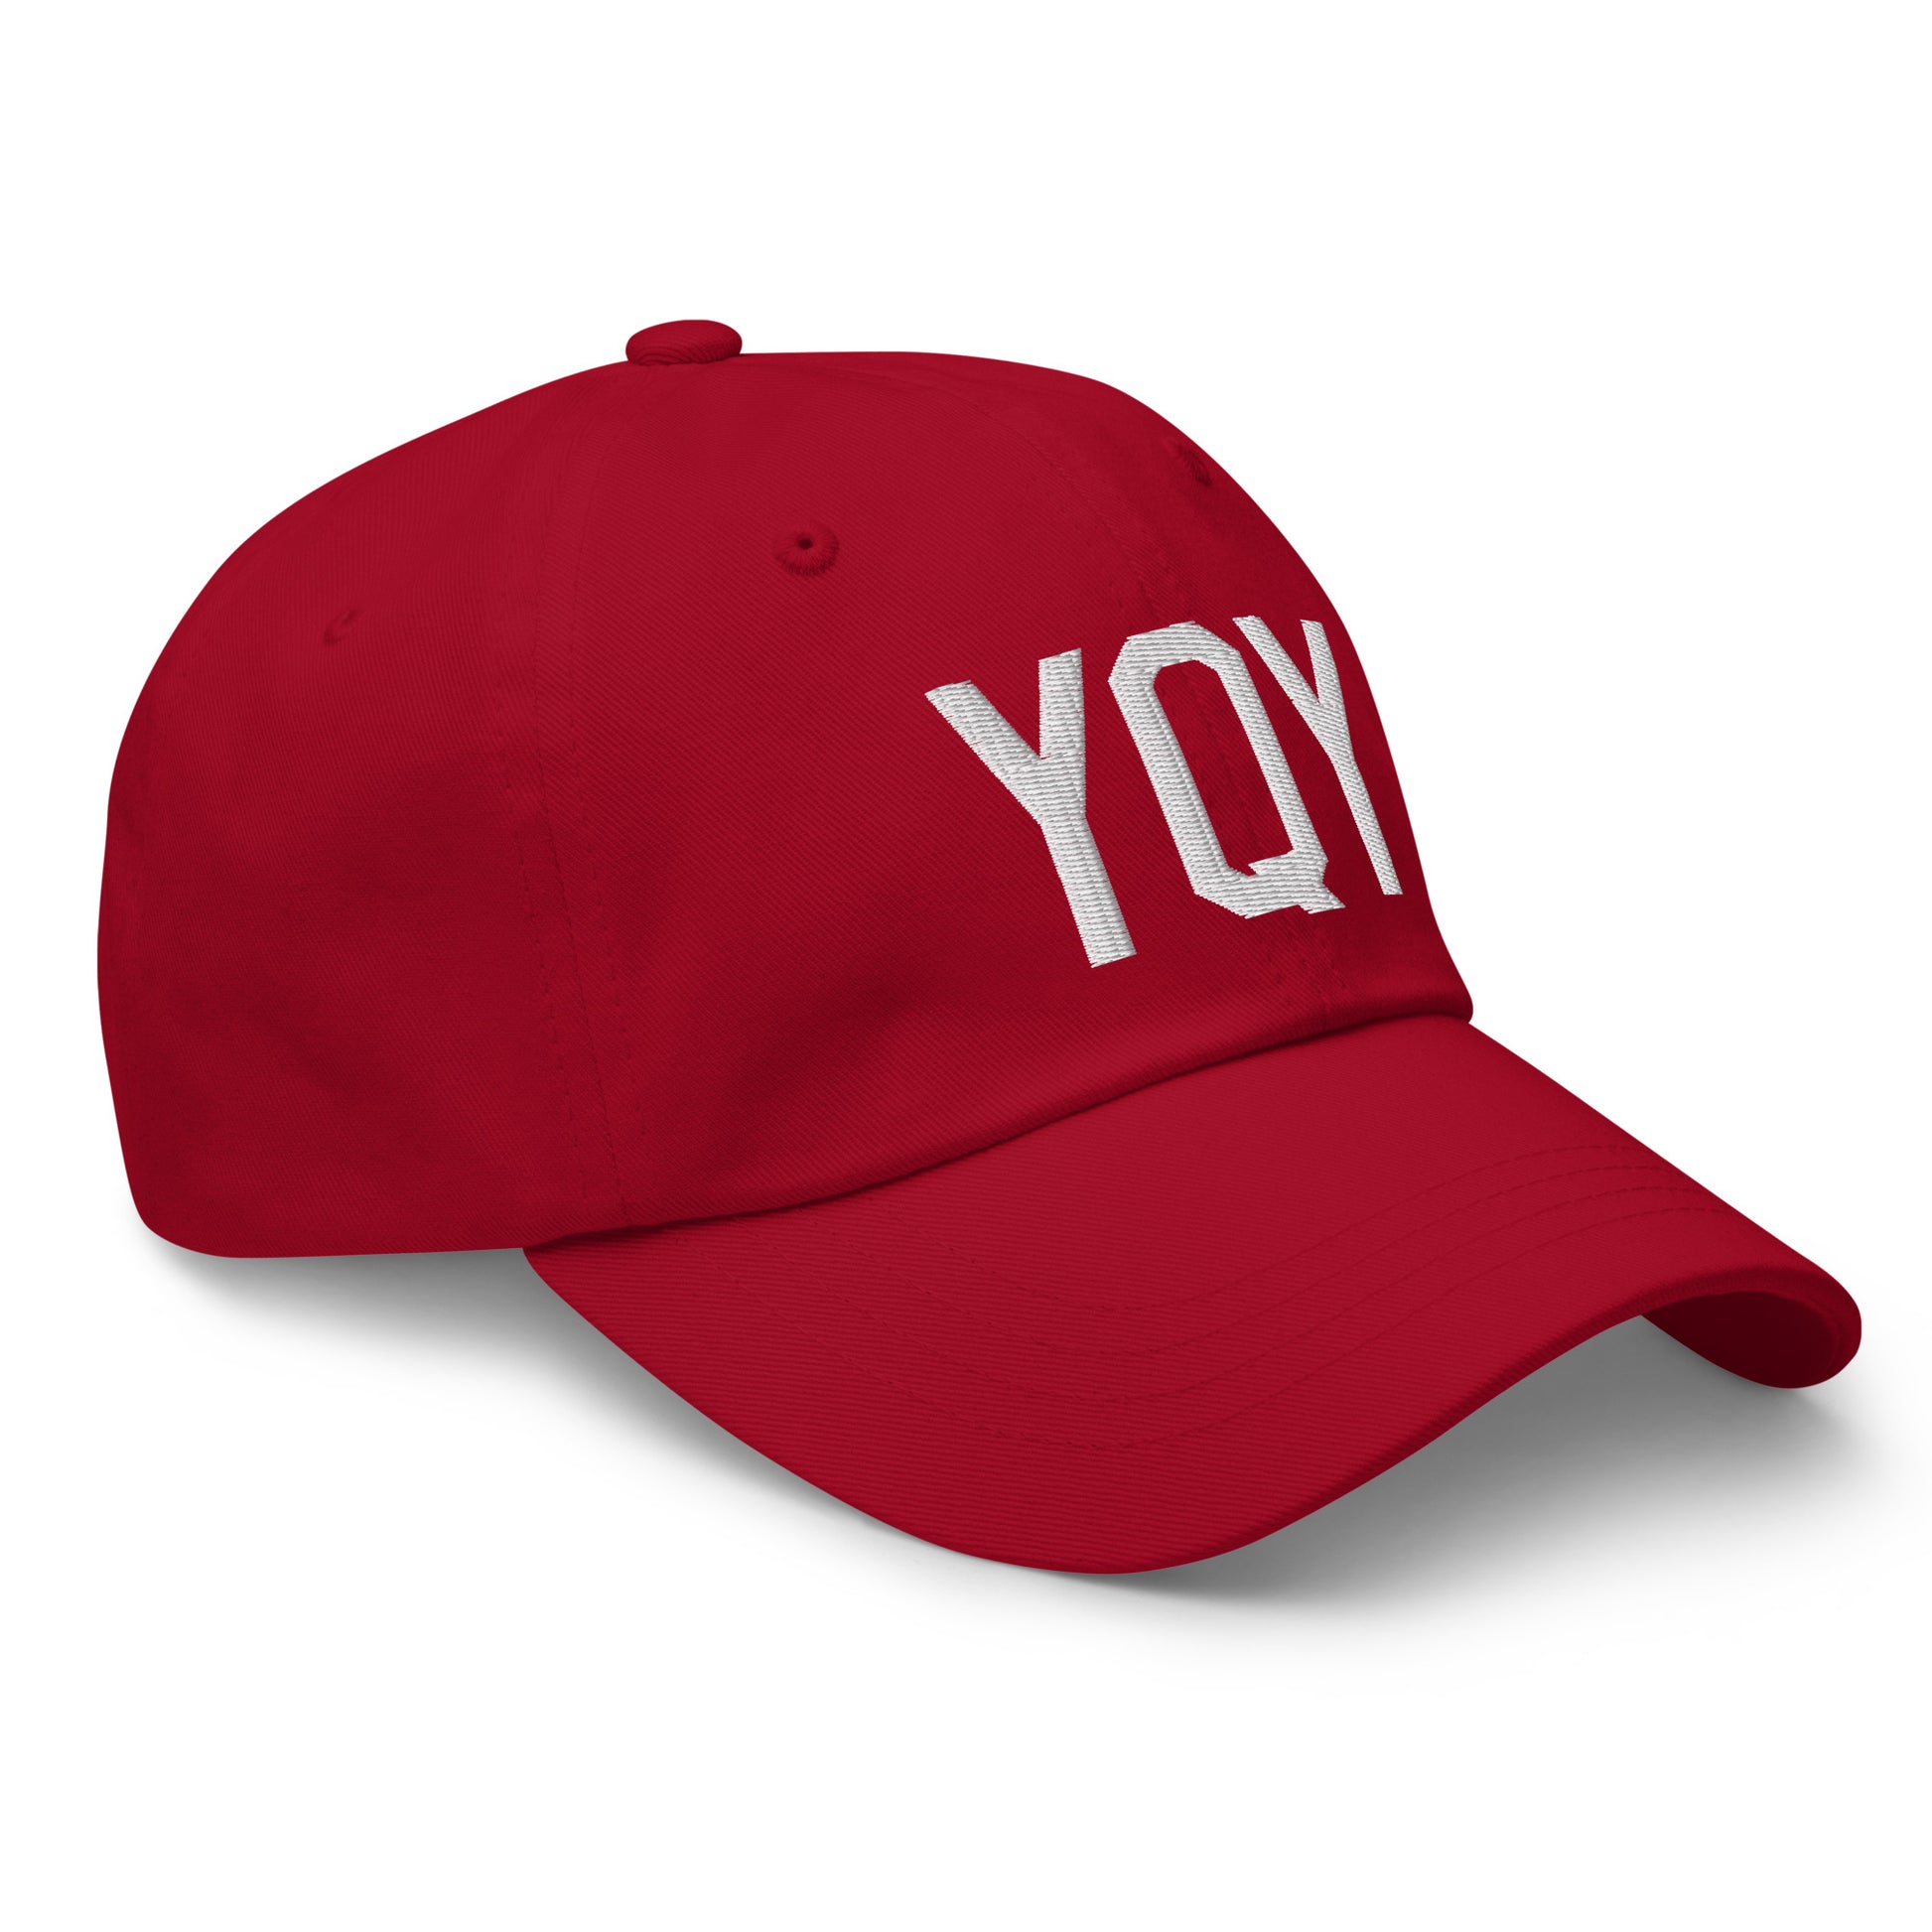 Airport Code Baseball Cap - White • YQY Sydney • YHM Designs - Image 20